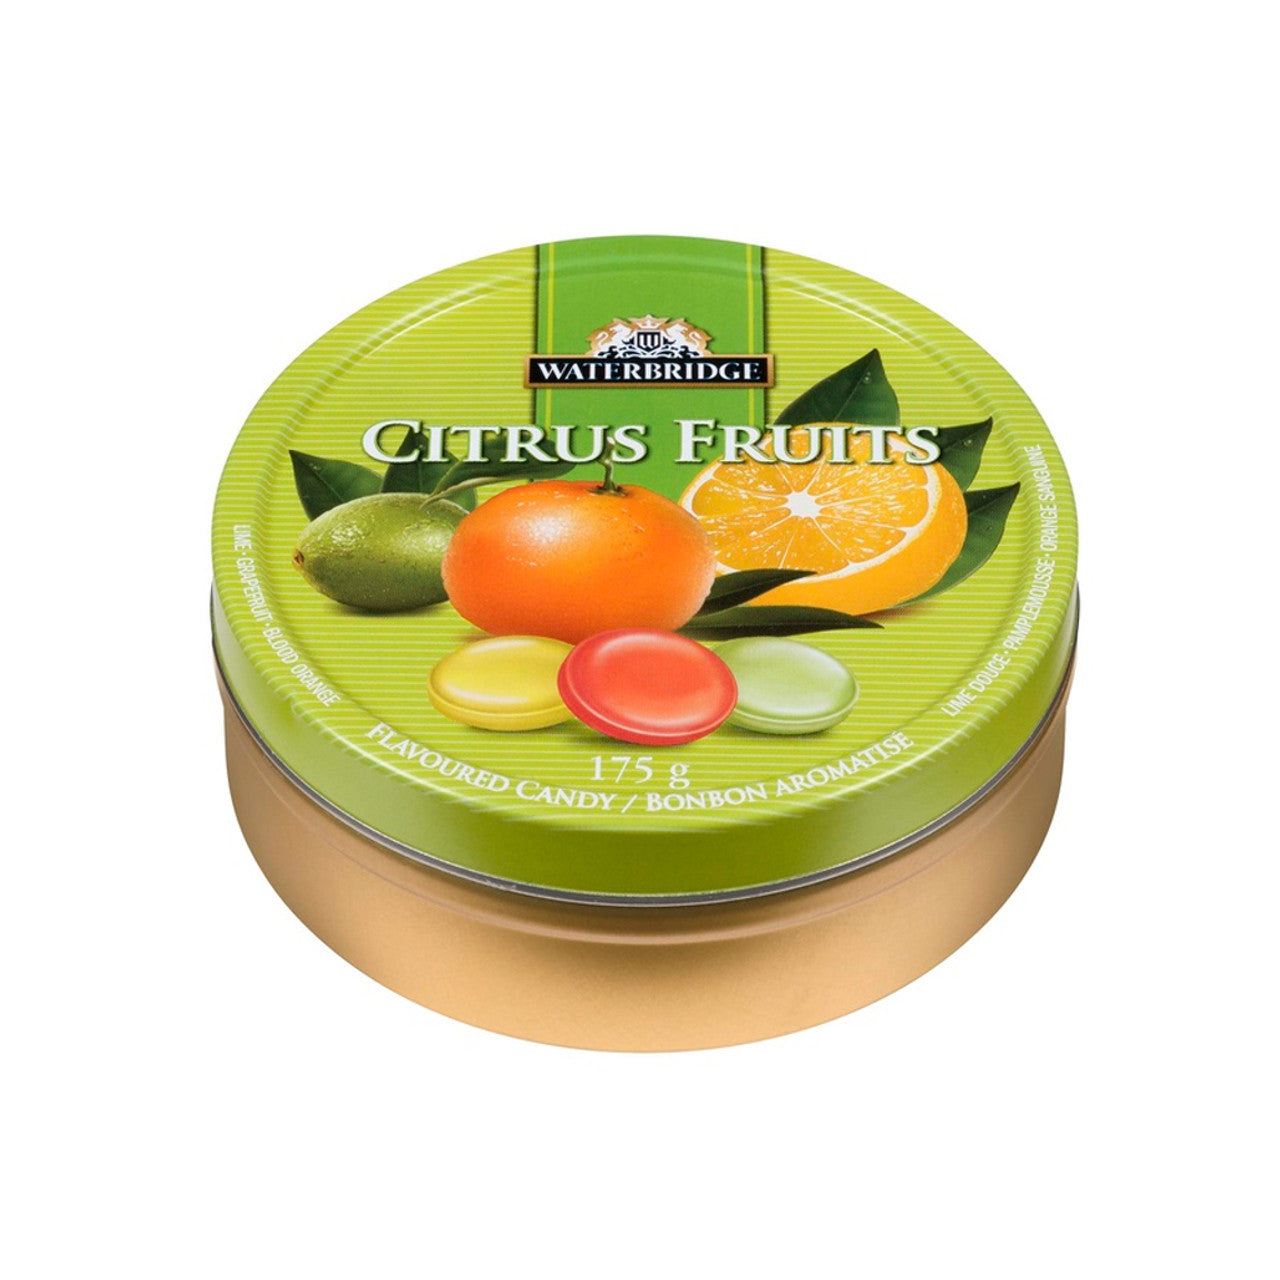 WATERBRIDGE - Citrus Fruits Drops  - FINAL SALE - EXPIRED or CLOSE TO EXPIRY